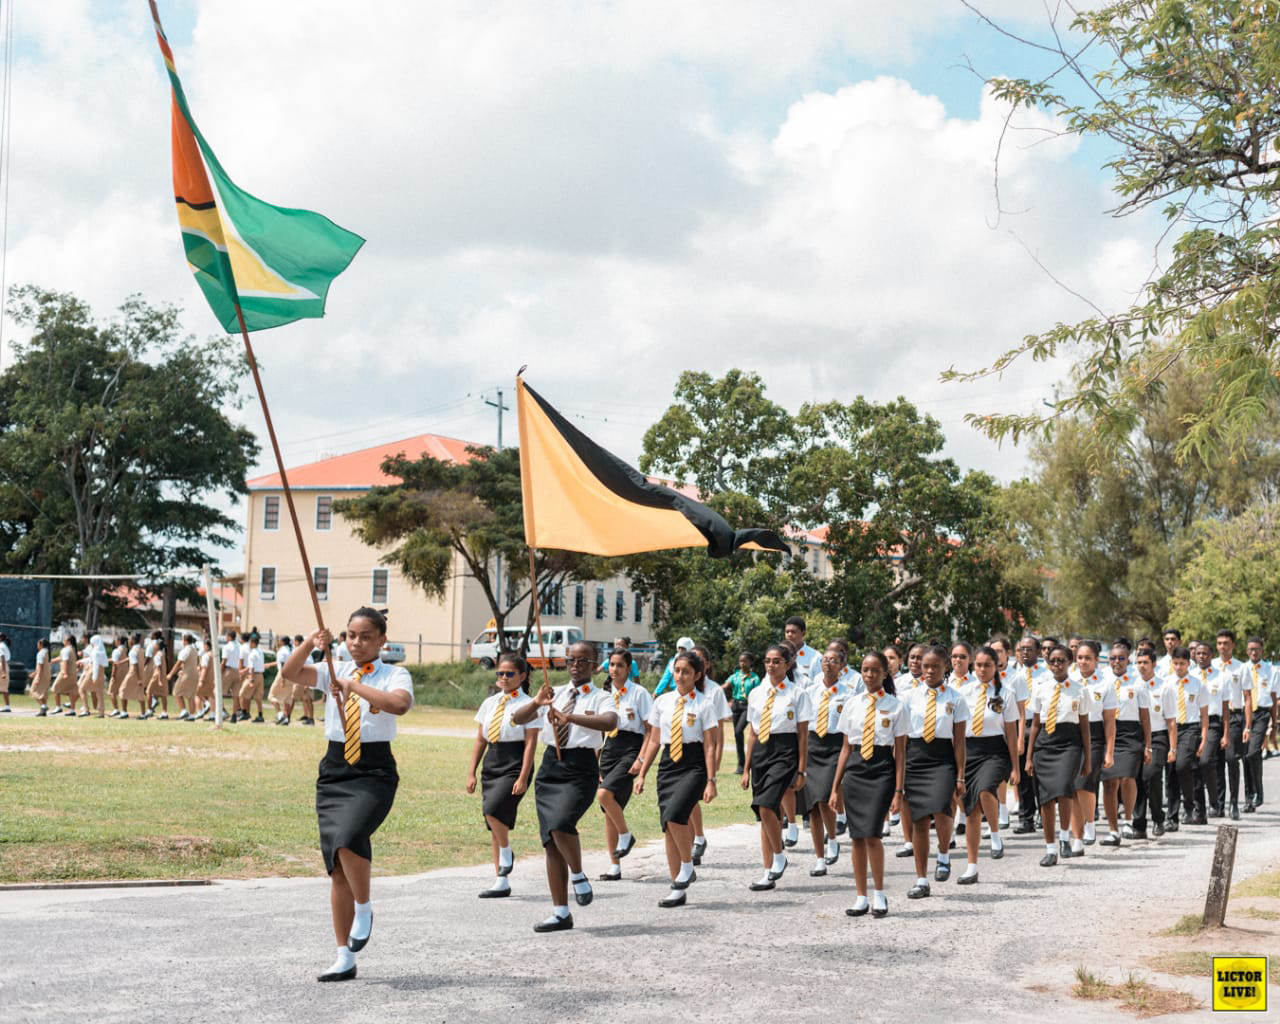  Alyssa Nurse (holding first flag) and her high school class in Guyana for a Remembrance Day Ceremony.